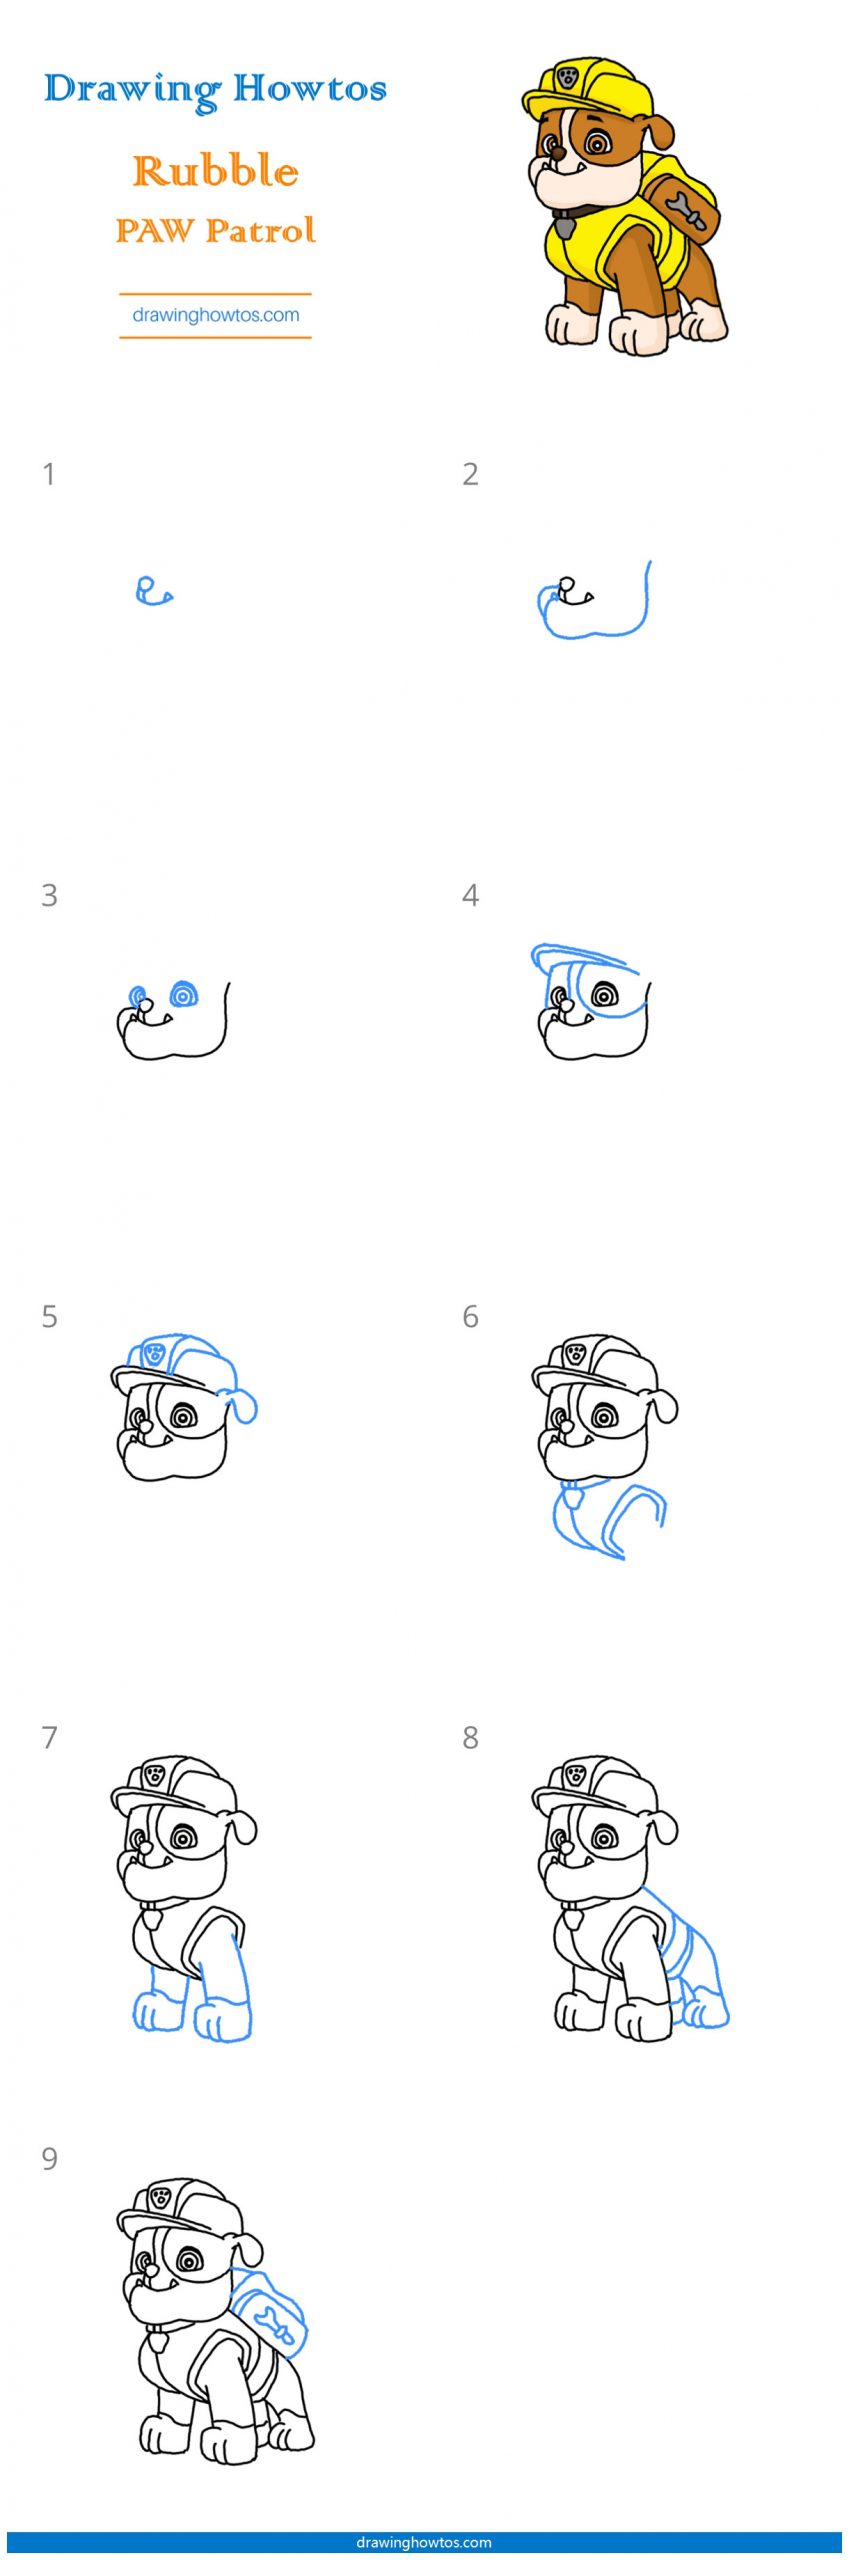 How to Draw Rubble from Paw Patrol Step by Step